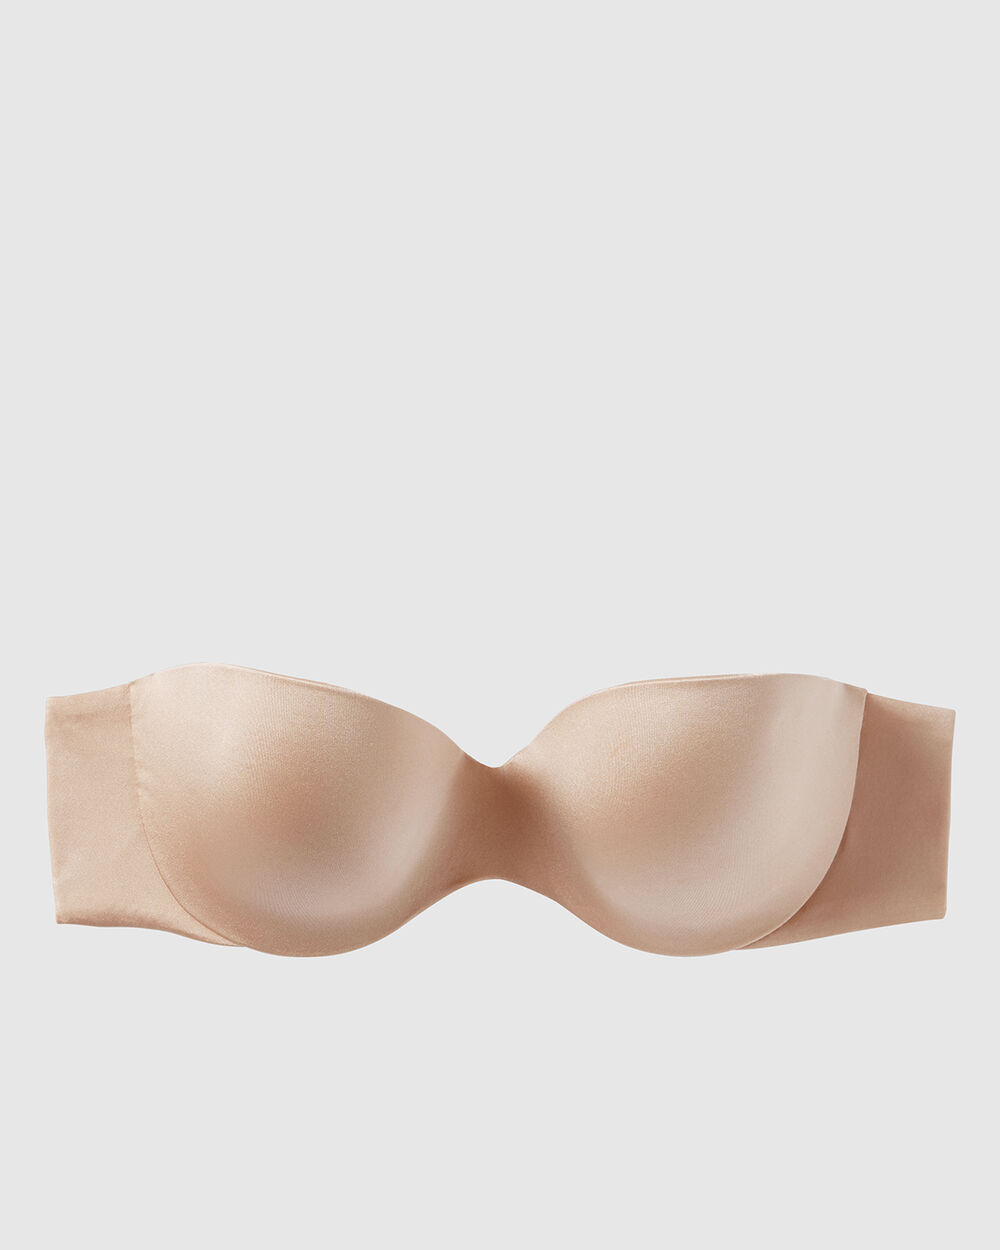 Here's your guide to choosing the best strapless bra